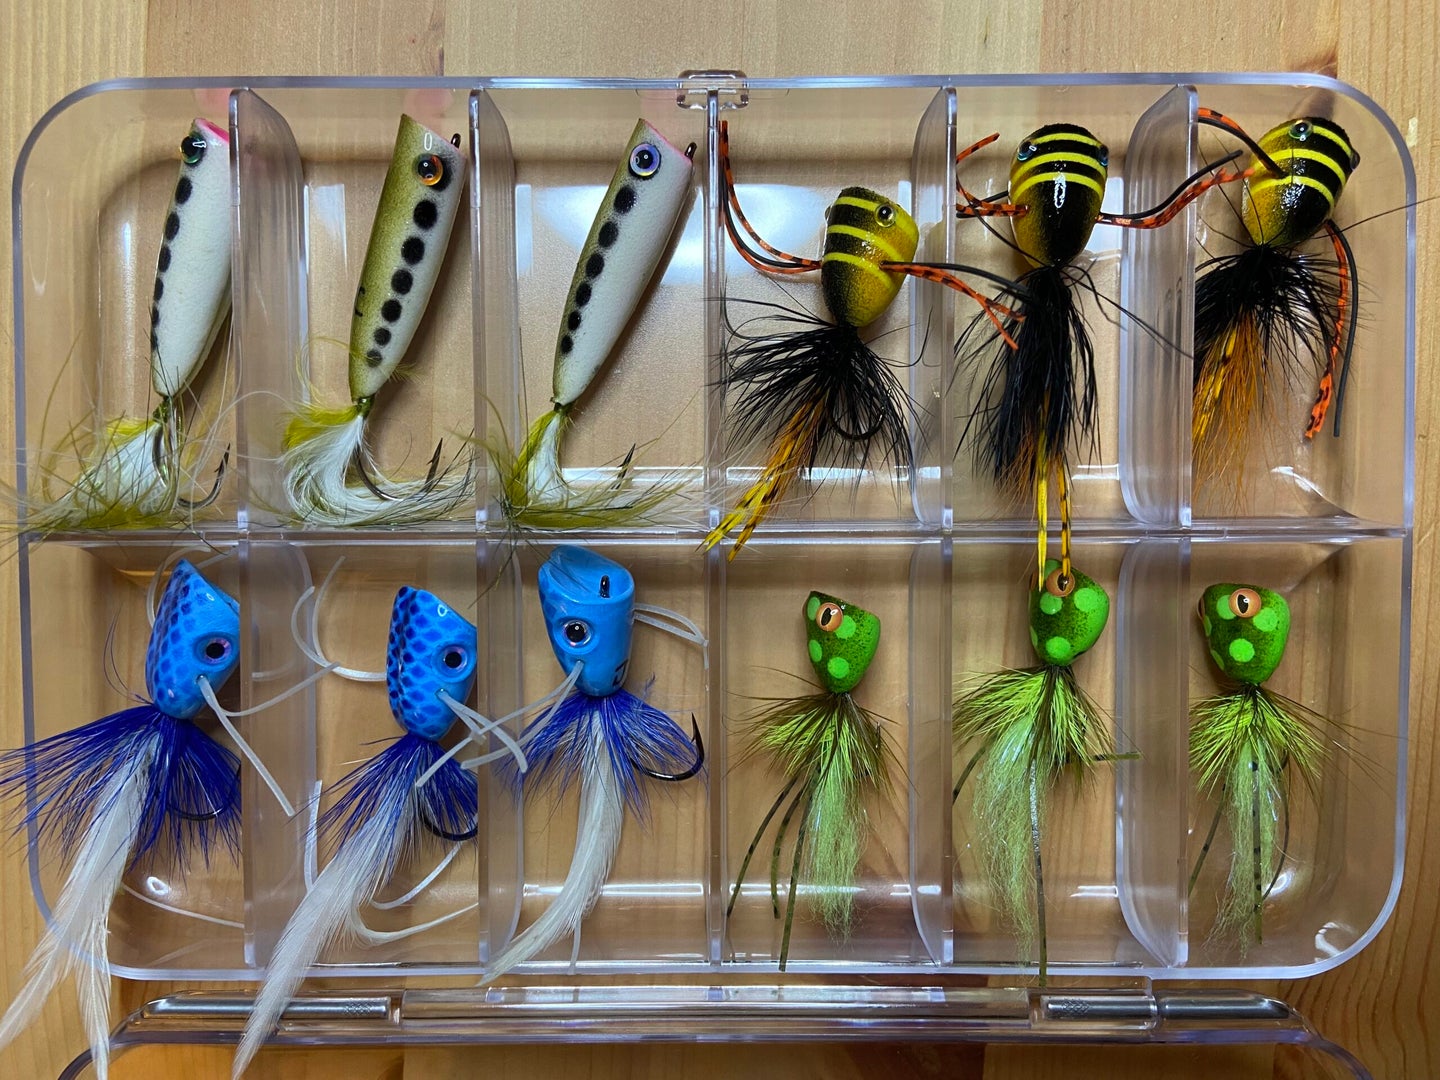 Tips on the Flyfishing with Popper Flies